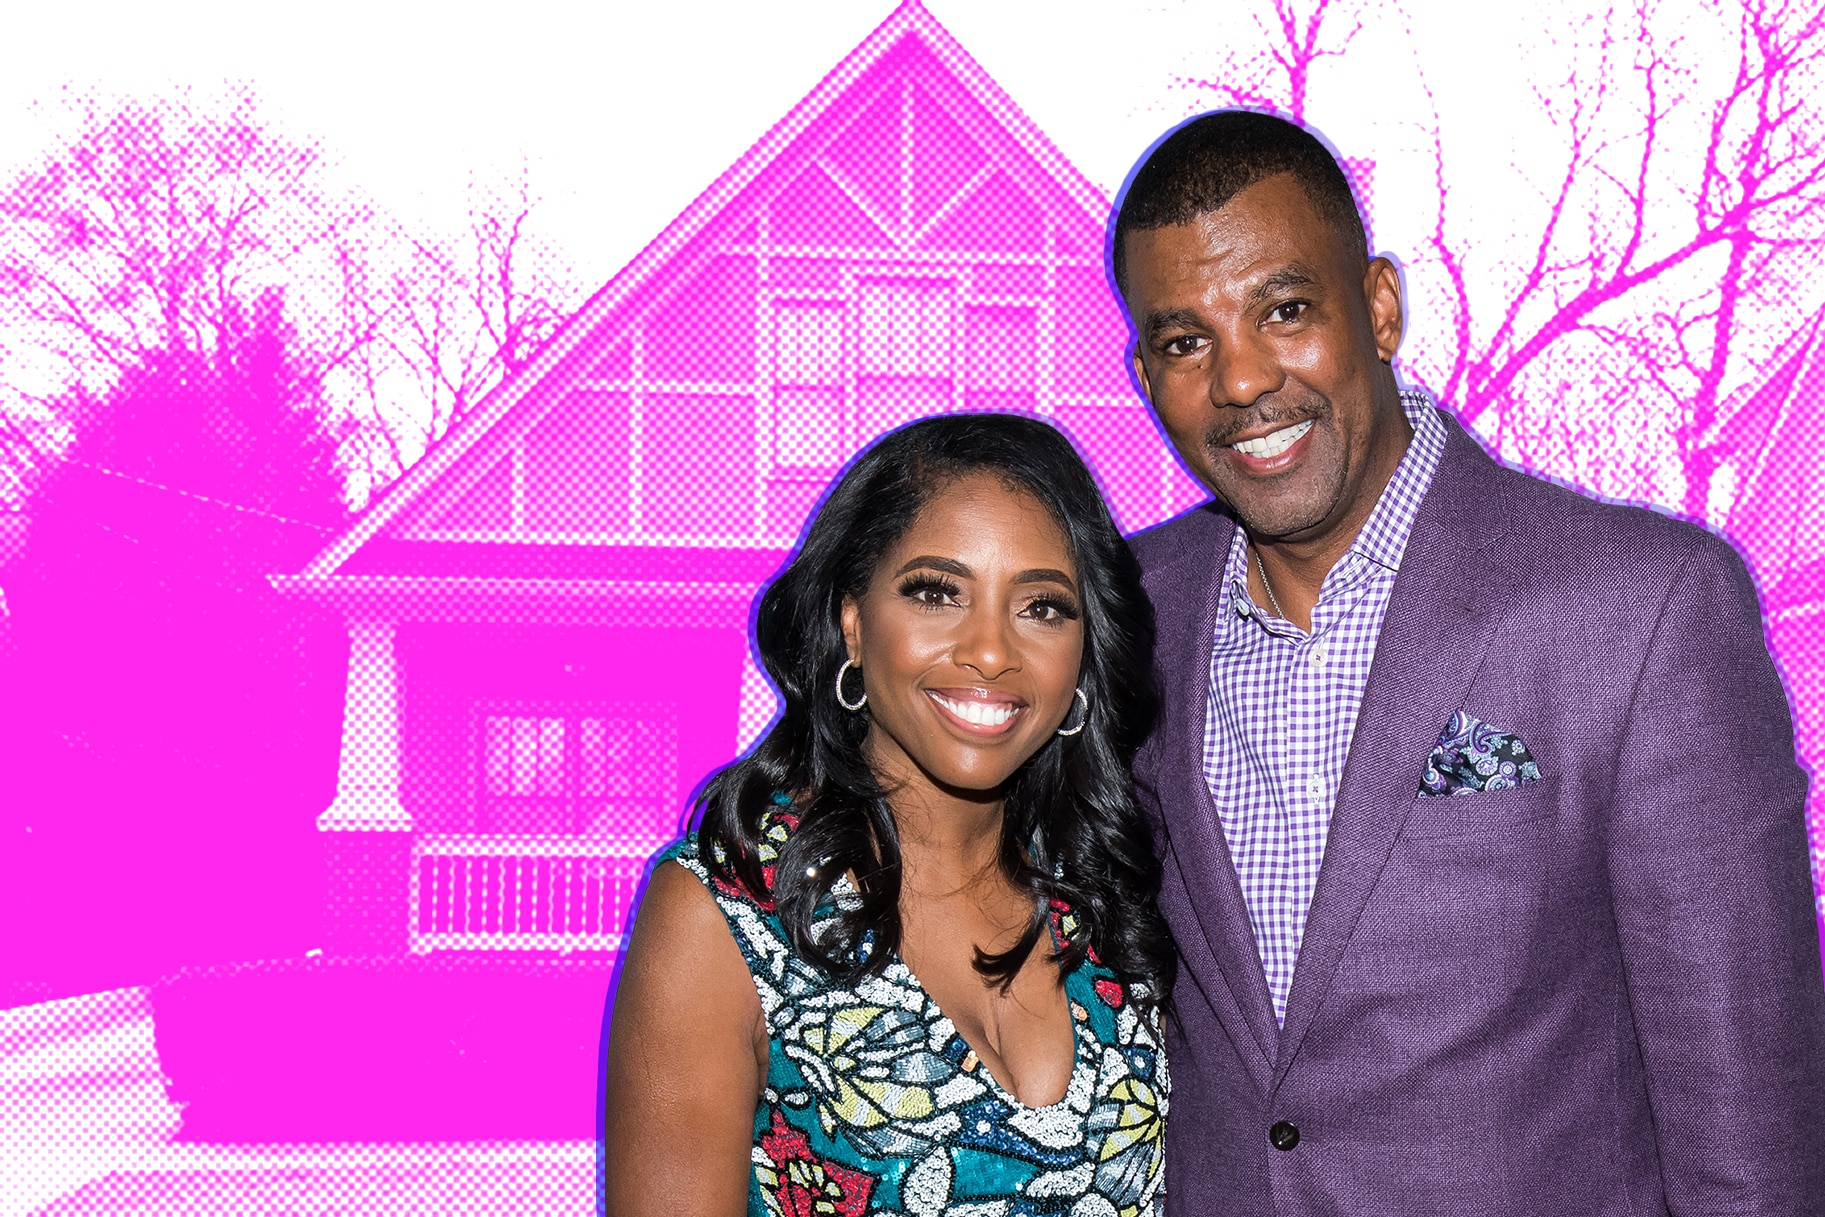 Atlanta Airbnb Home for Super Bowl Simone and Cecil Whitmore's Rental